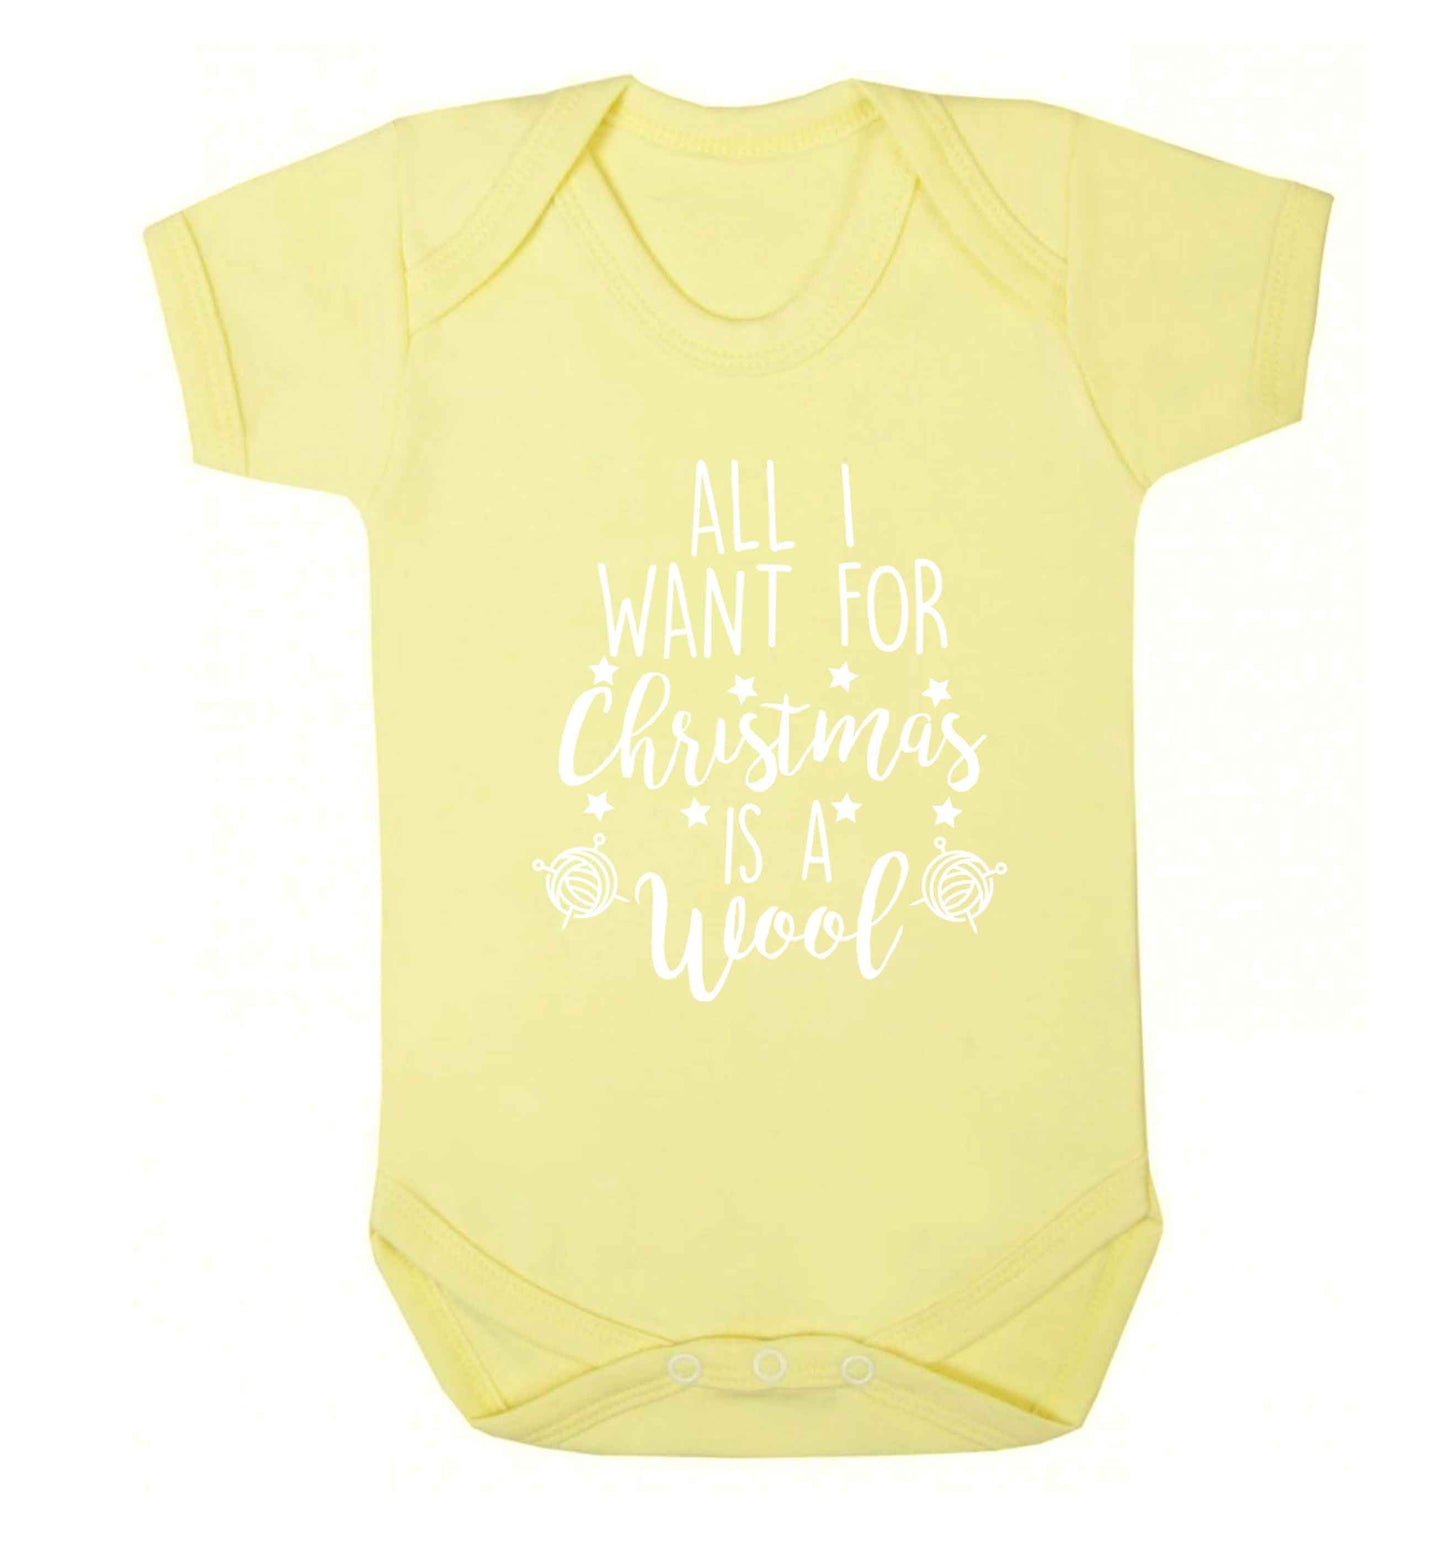 All I want for Christmas is wool! Baby Vest pale yellow 18-24 months